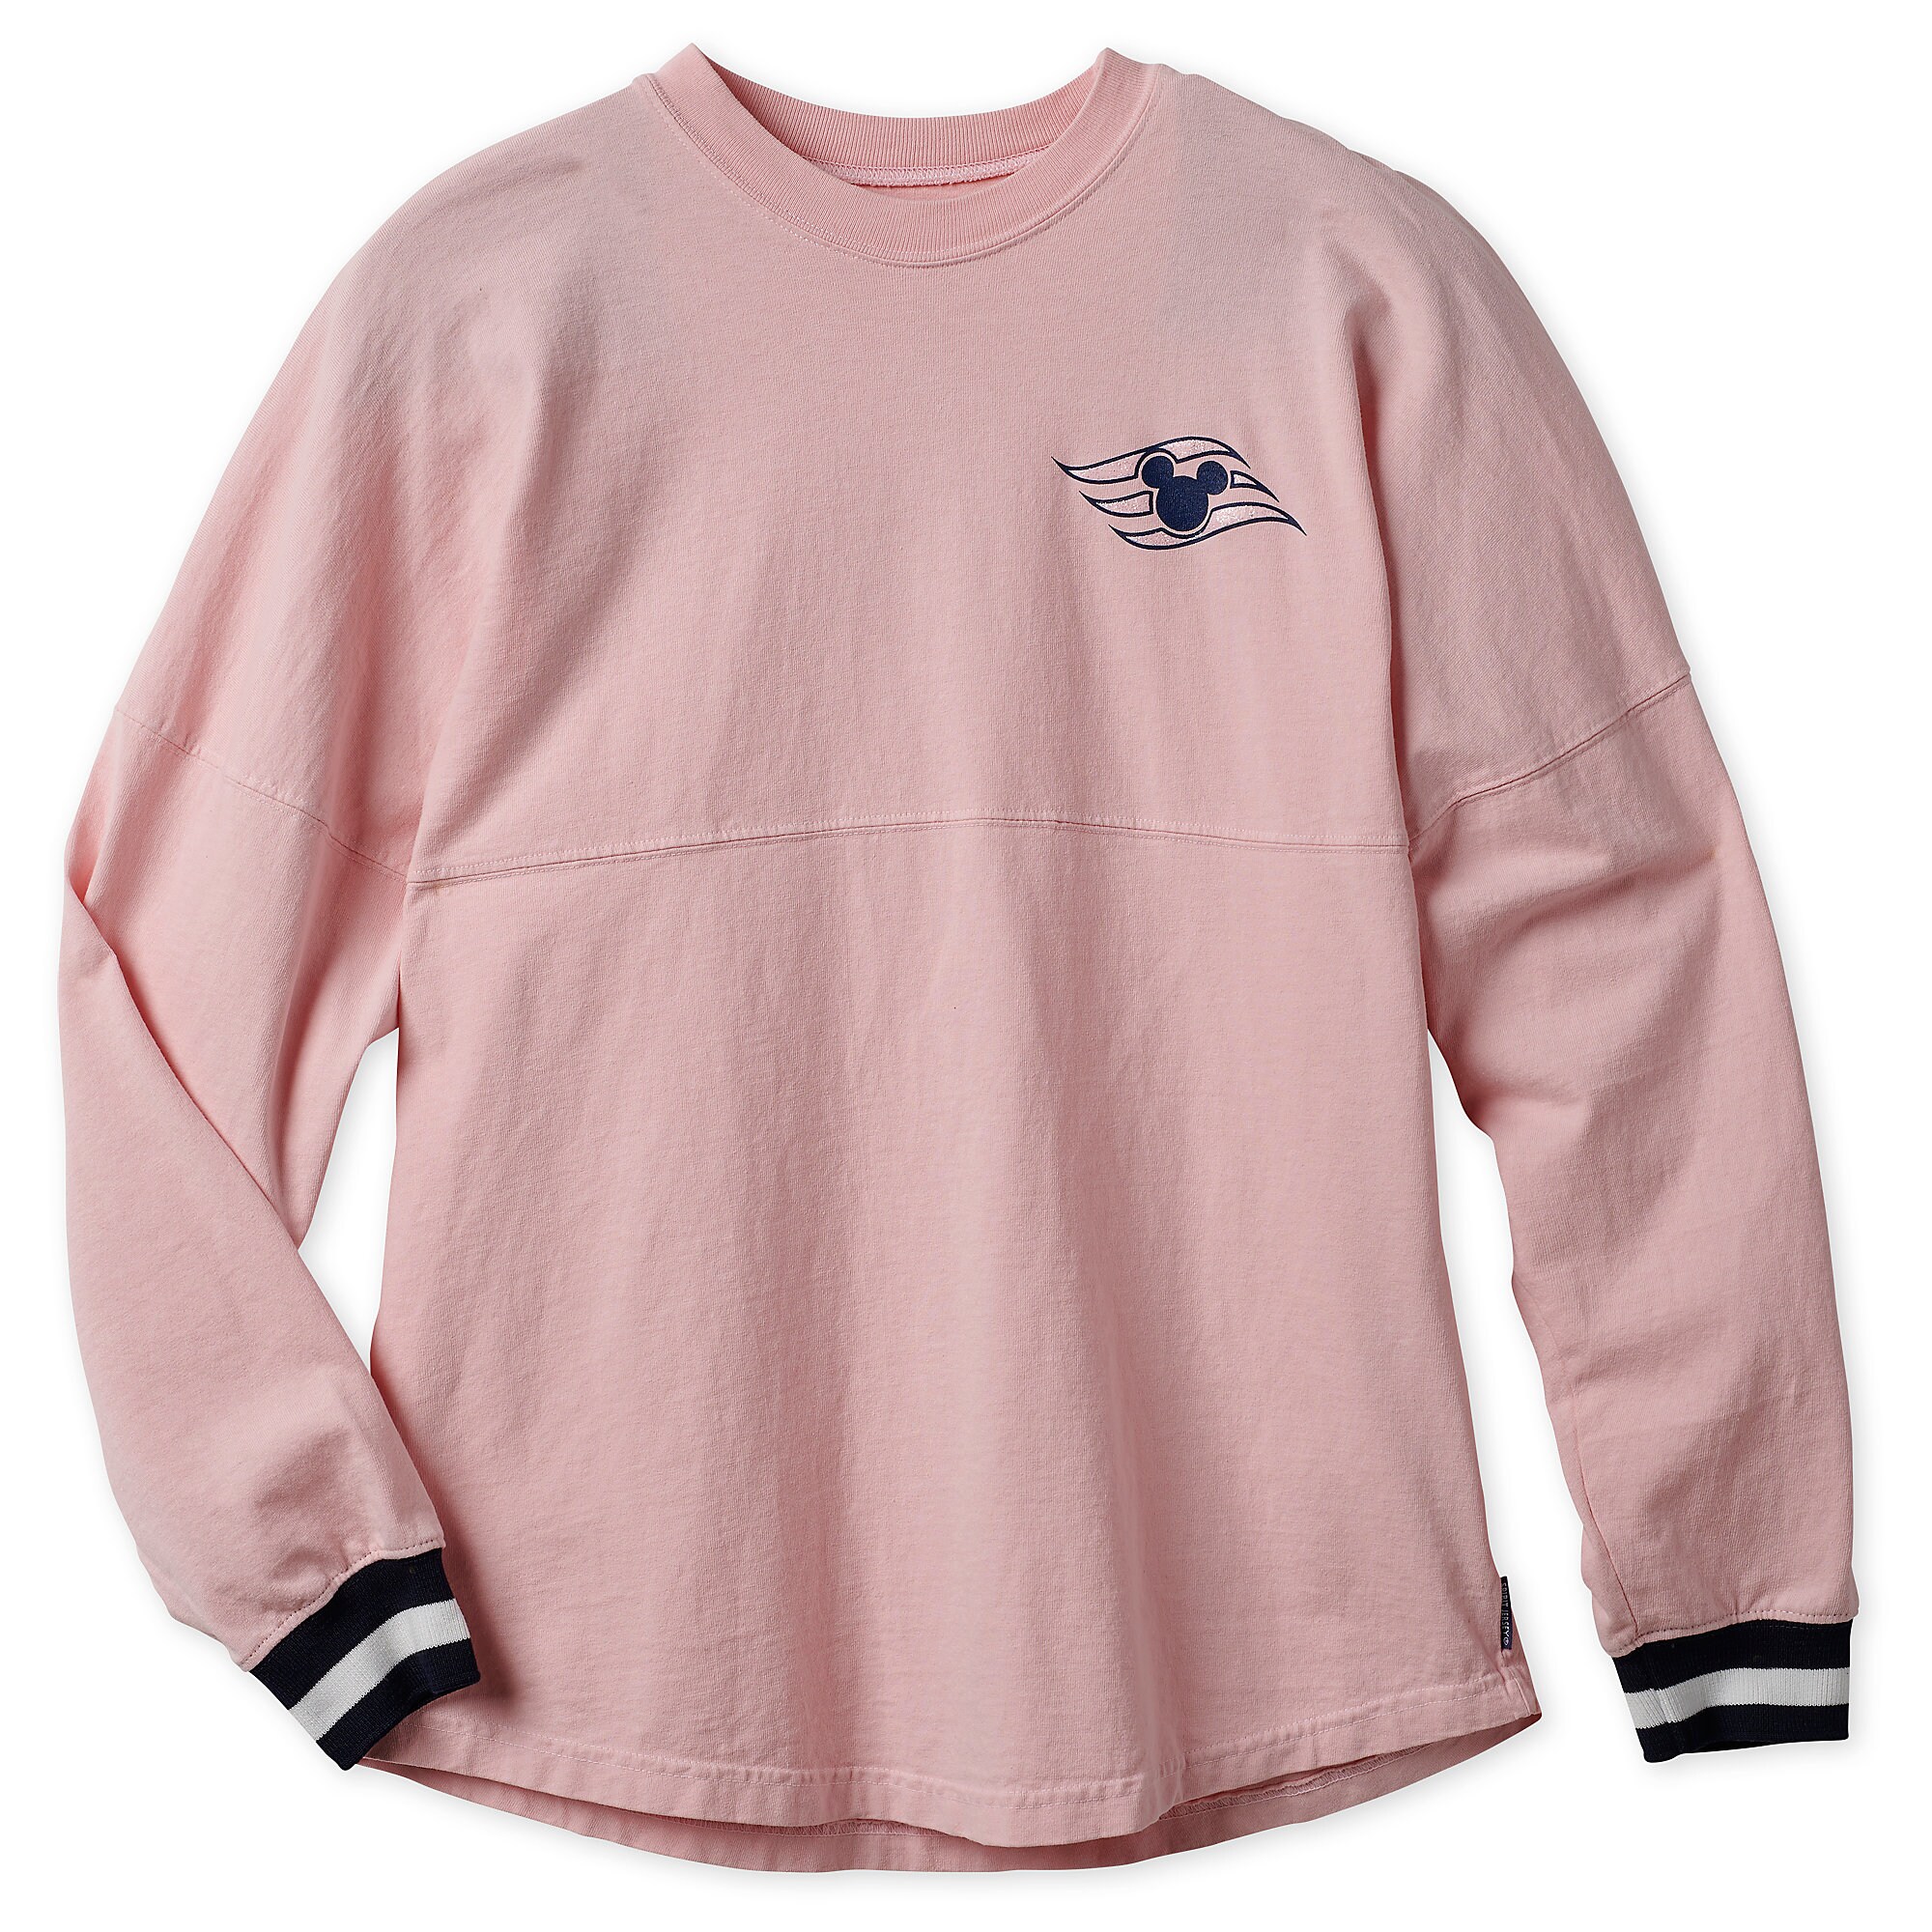 Disney Cruise Line Spirit Jersey for Adults - Pink